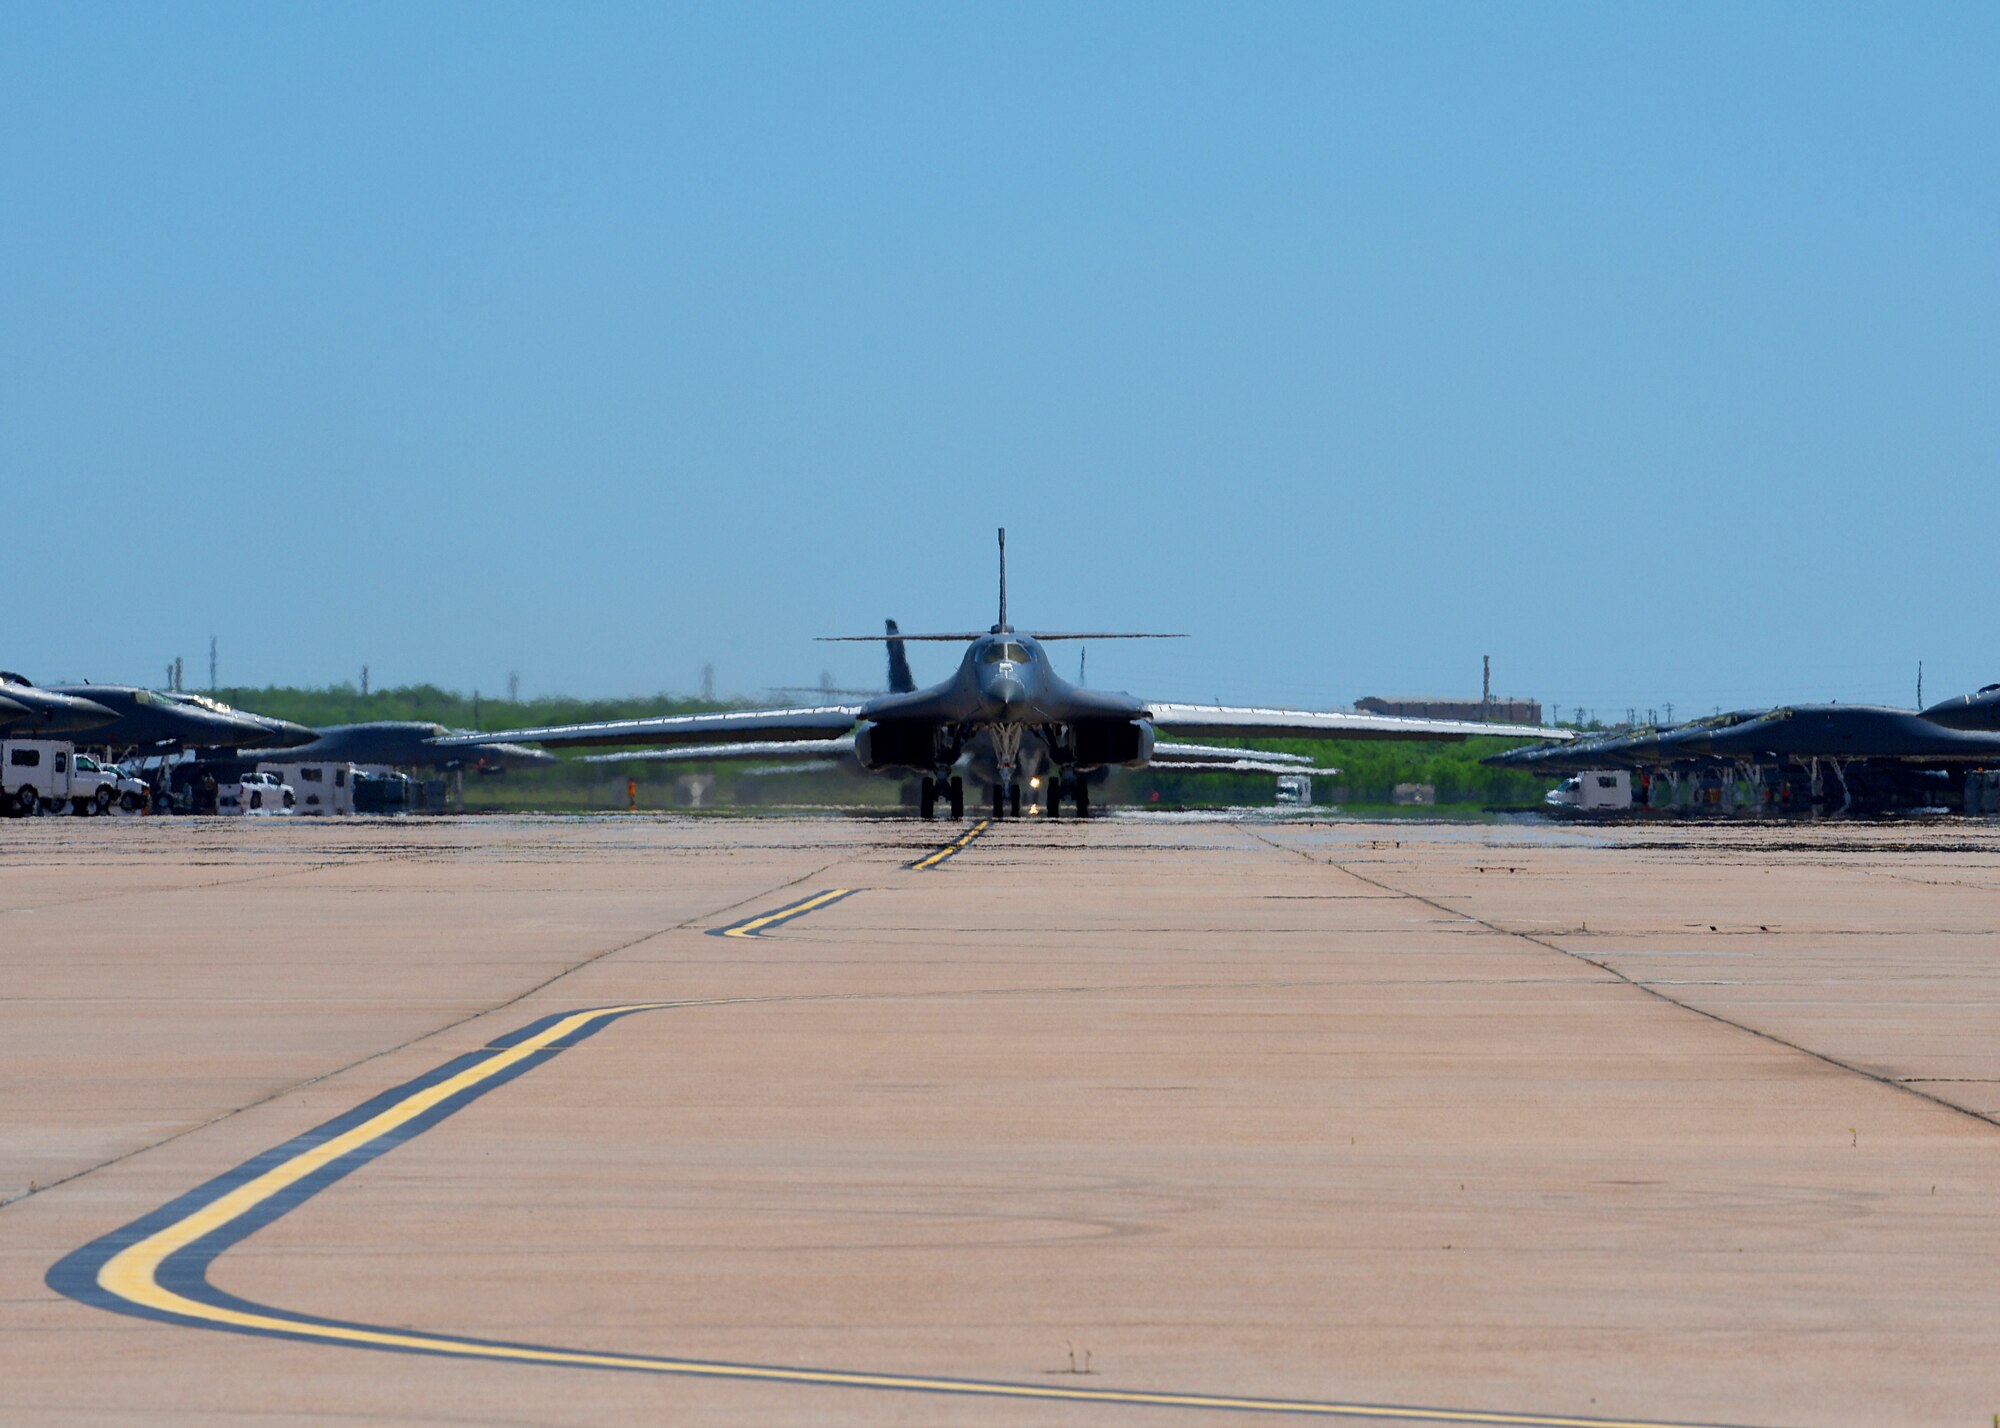 A line of B-1B Lancers from the 9th Bomb Squadron taxi before departing on a Bomber Task Force deployment at Dyess Air Force Base, Texas, April 30, 2020. A BTF of four B-1s and approximately 200 Airmen deployed to Andersen Air Force Base, Guam, as part of the Air Force’s dynamic force employment initiative. (U.S. Air Force photo by Senior Airman Mercedes Porter)